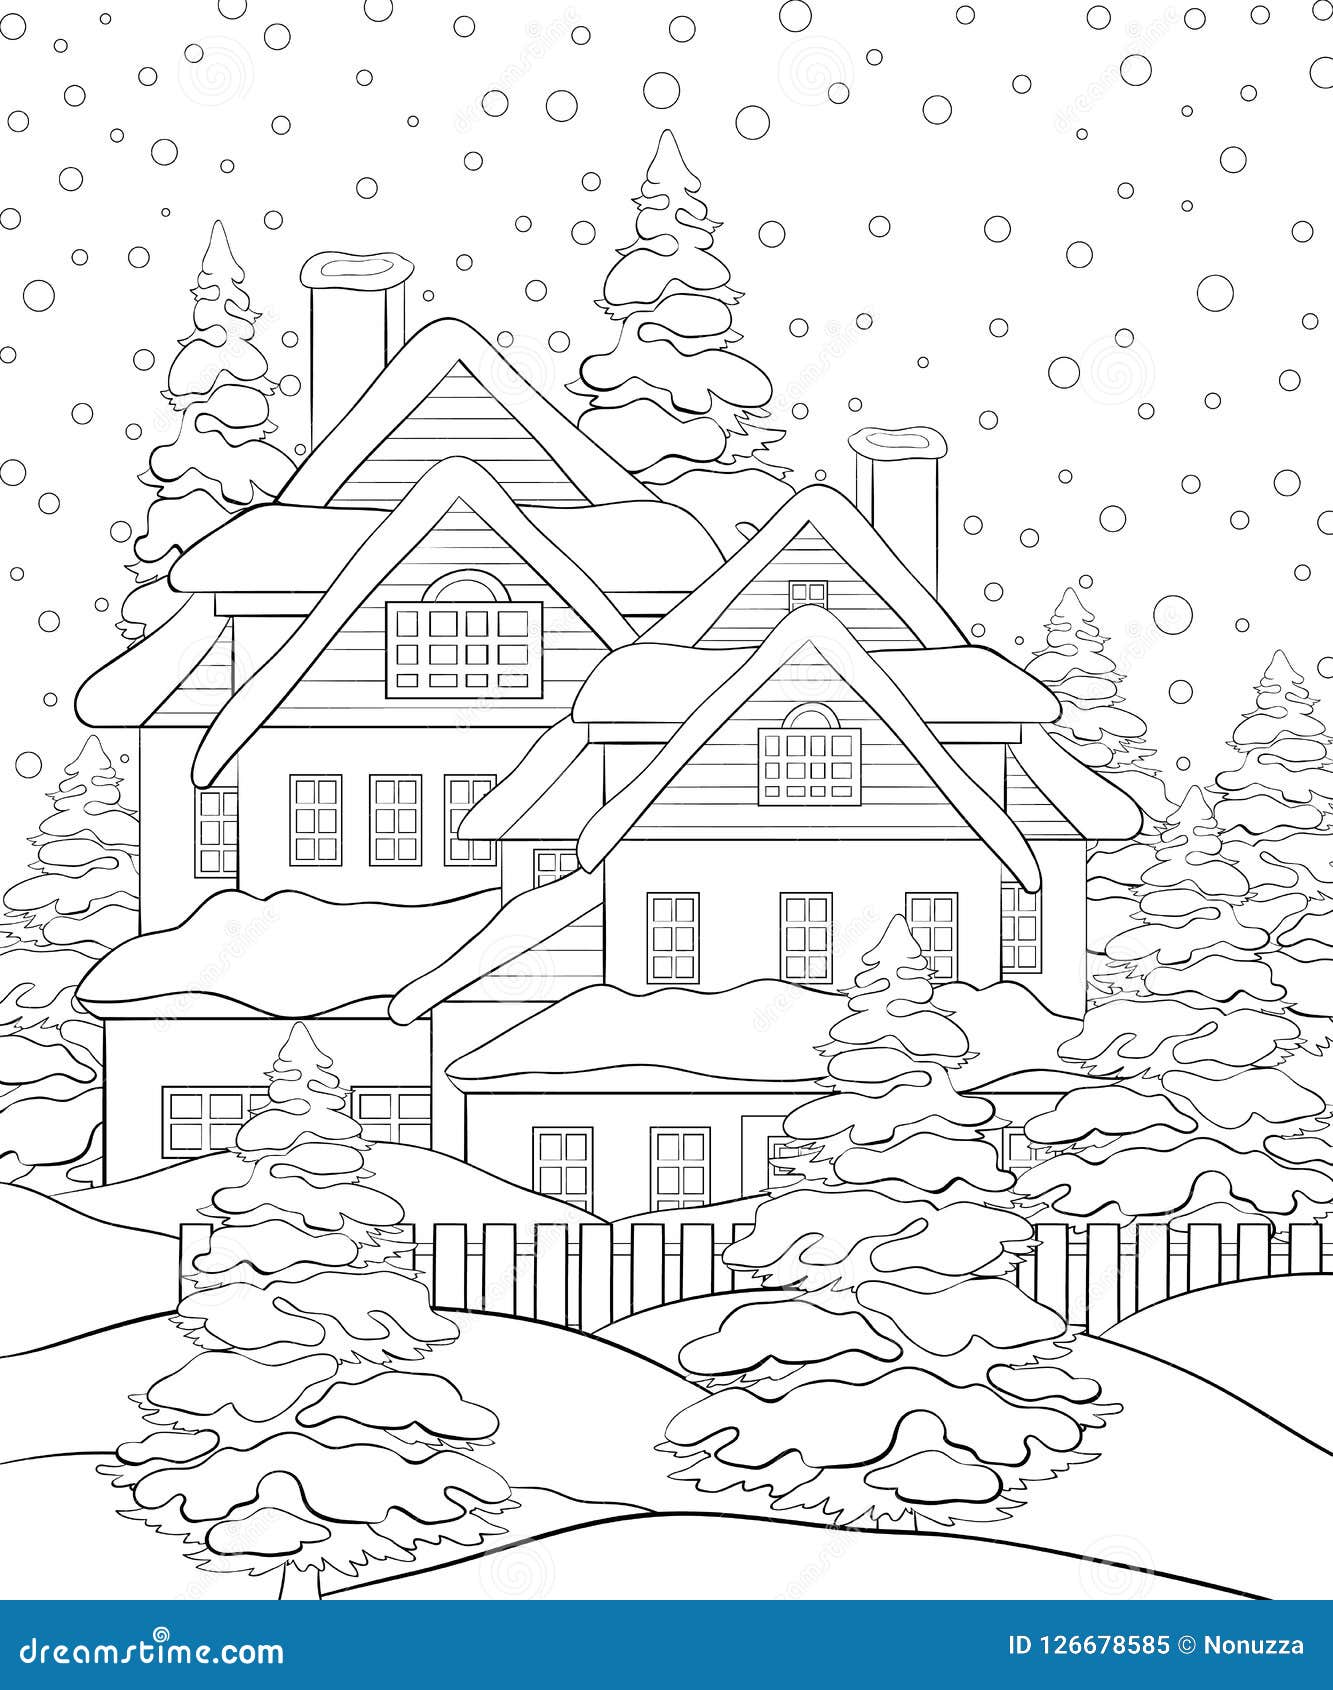 Adult Coloring Book,page an Winter Landscape with House Image for ...